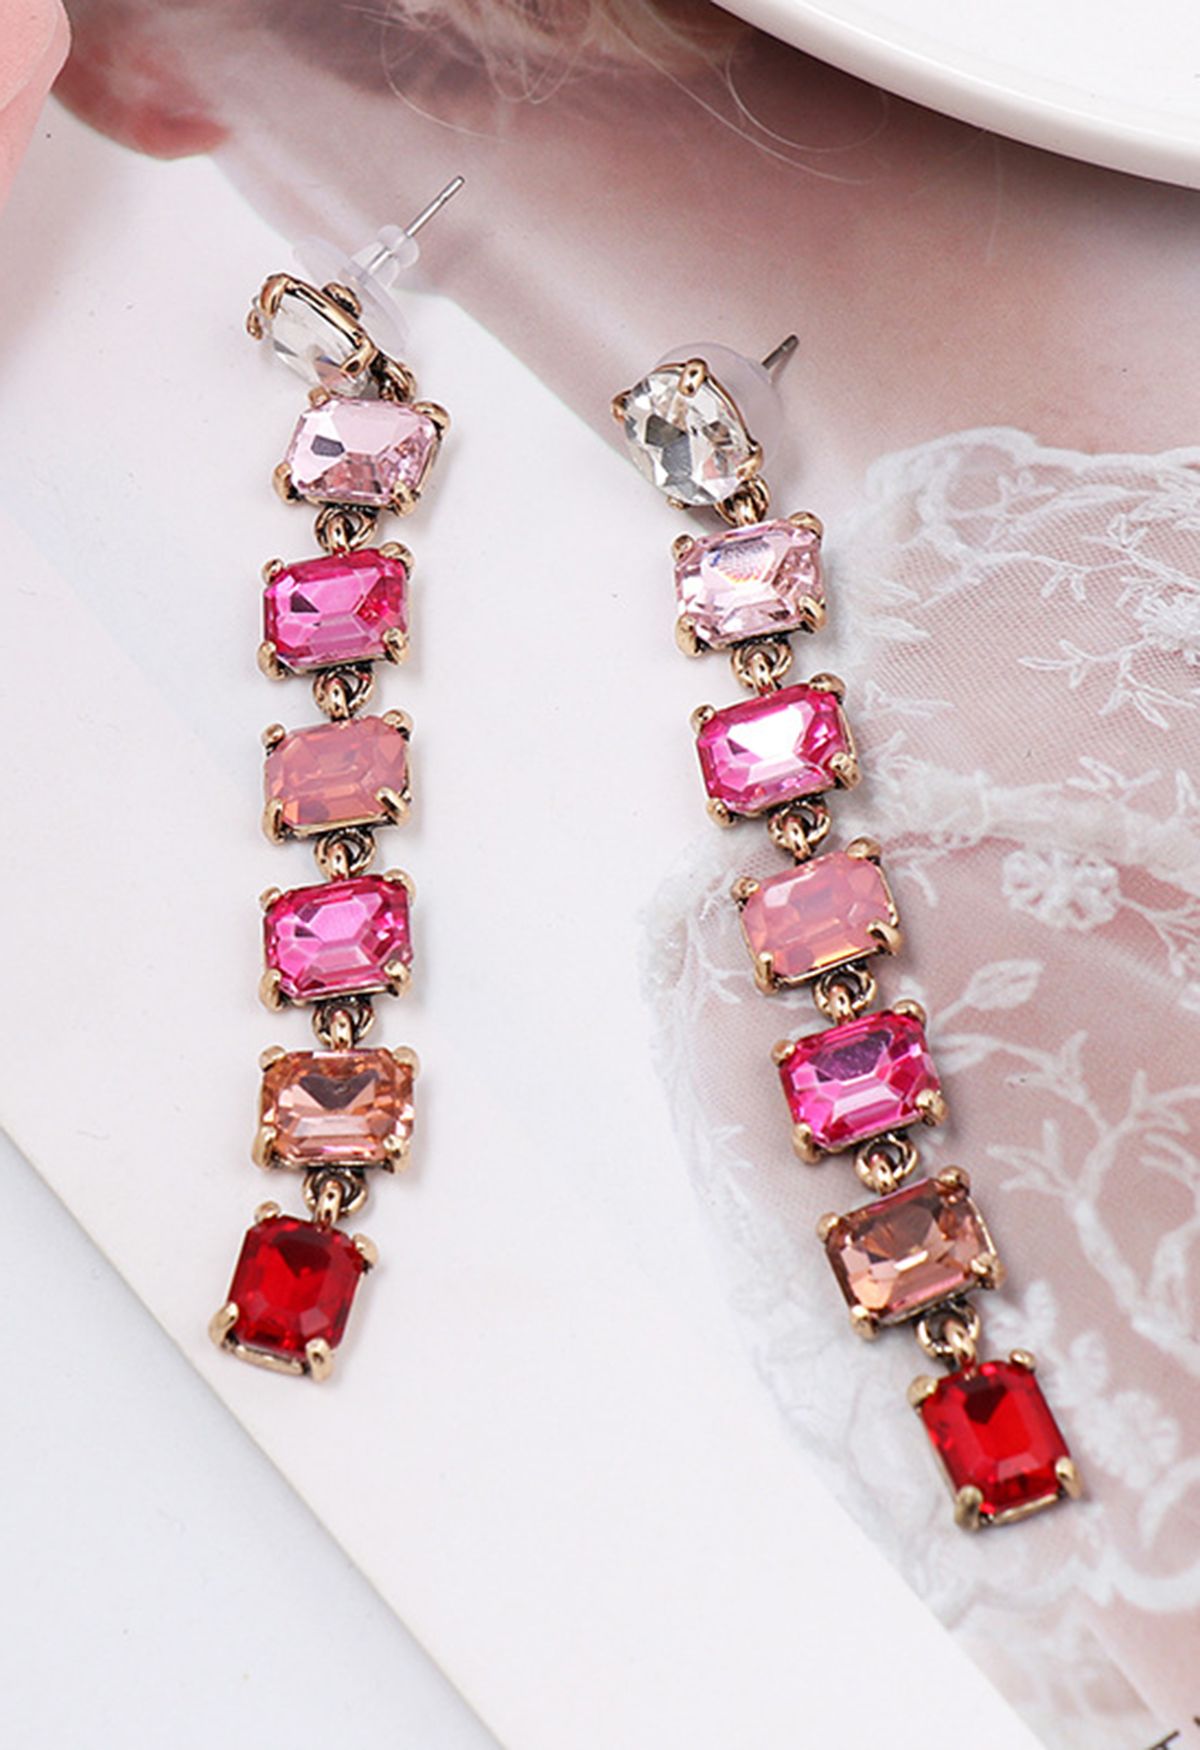 Ombre Rectangle Crystal Earrings in Pink